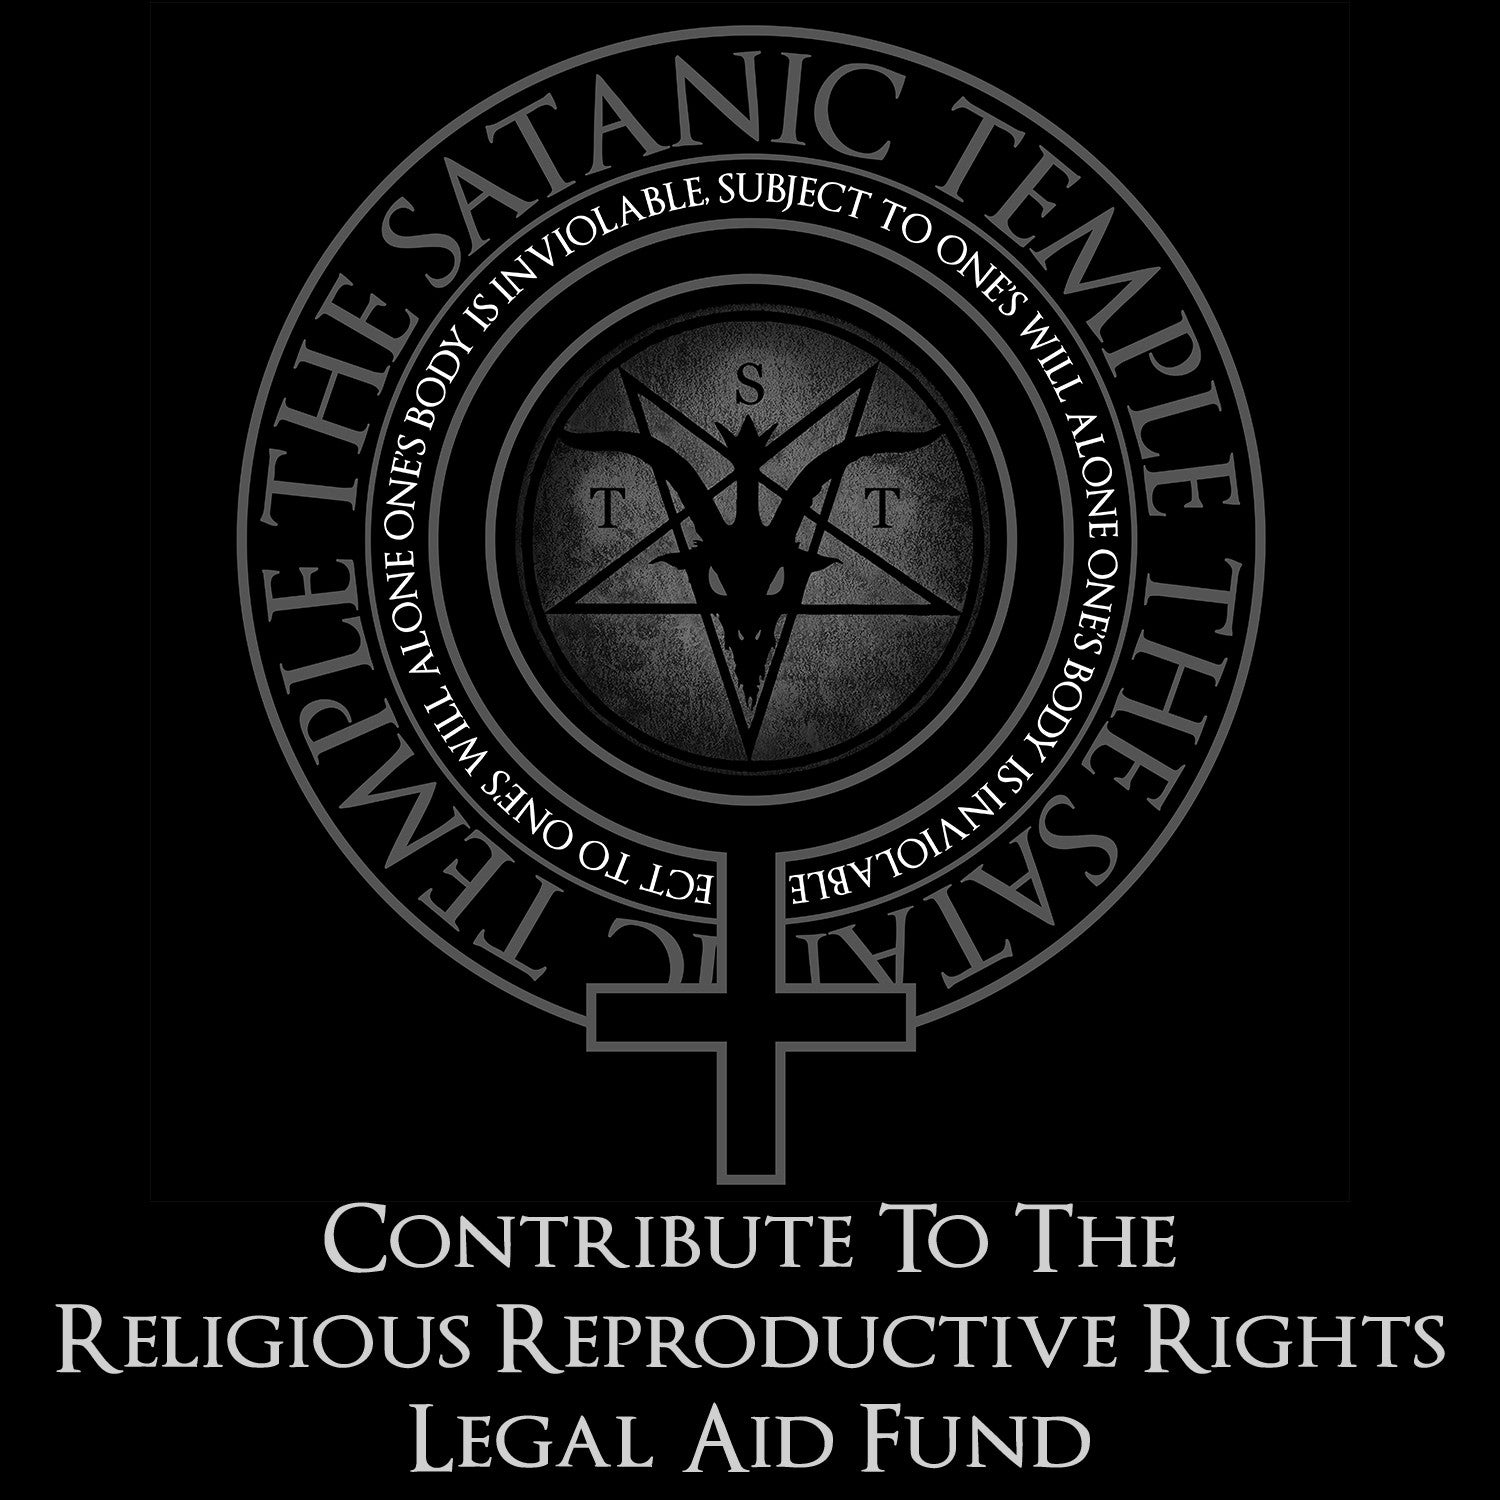 Contribute to the Religious Reproductive Rights Legal Aid Fund